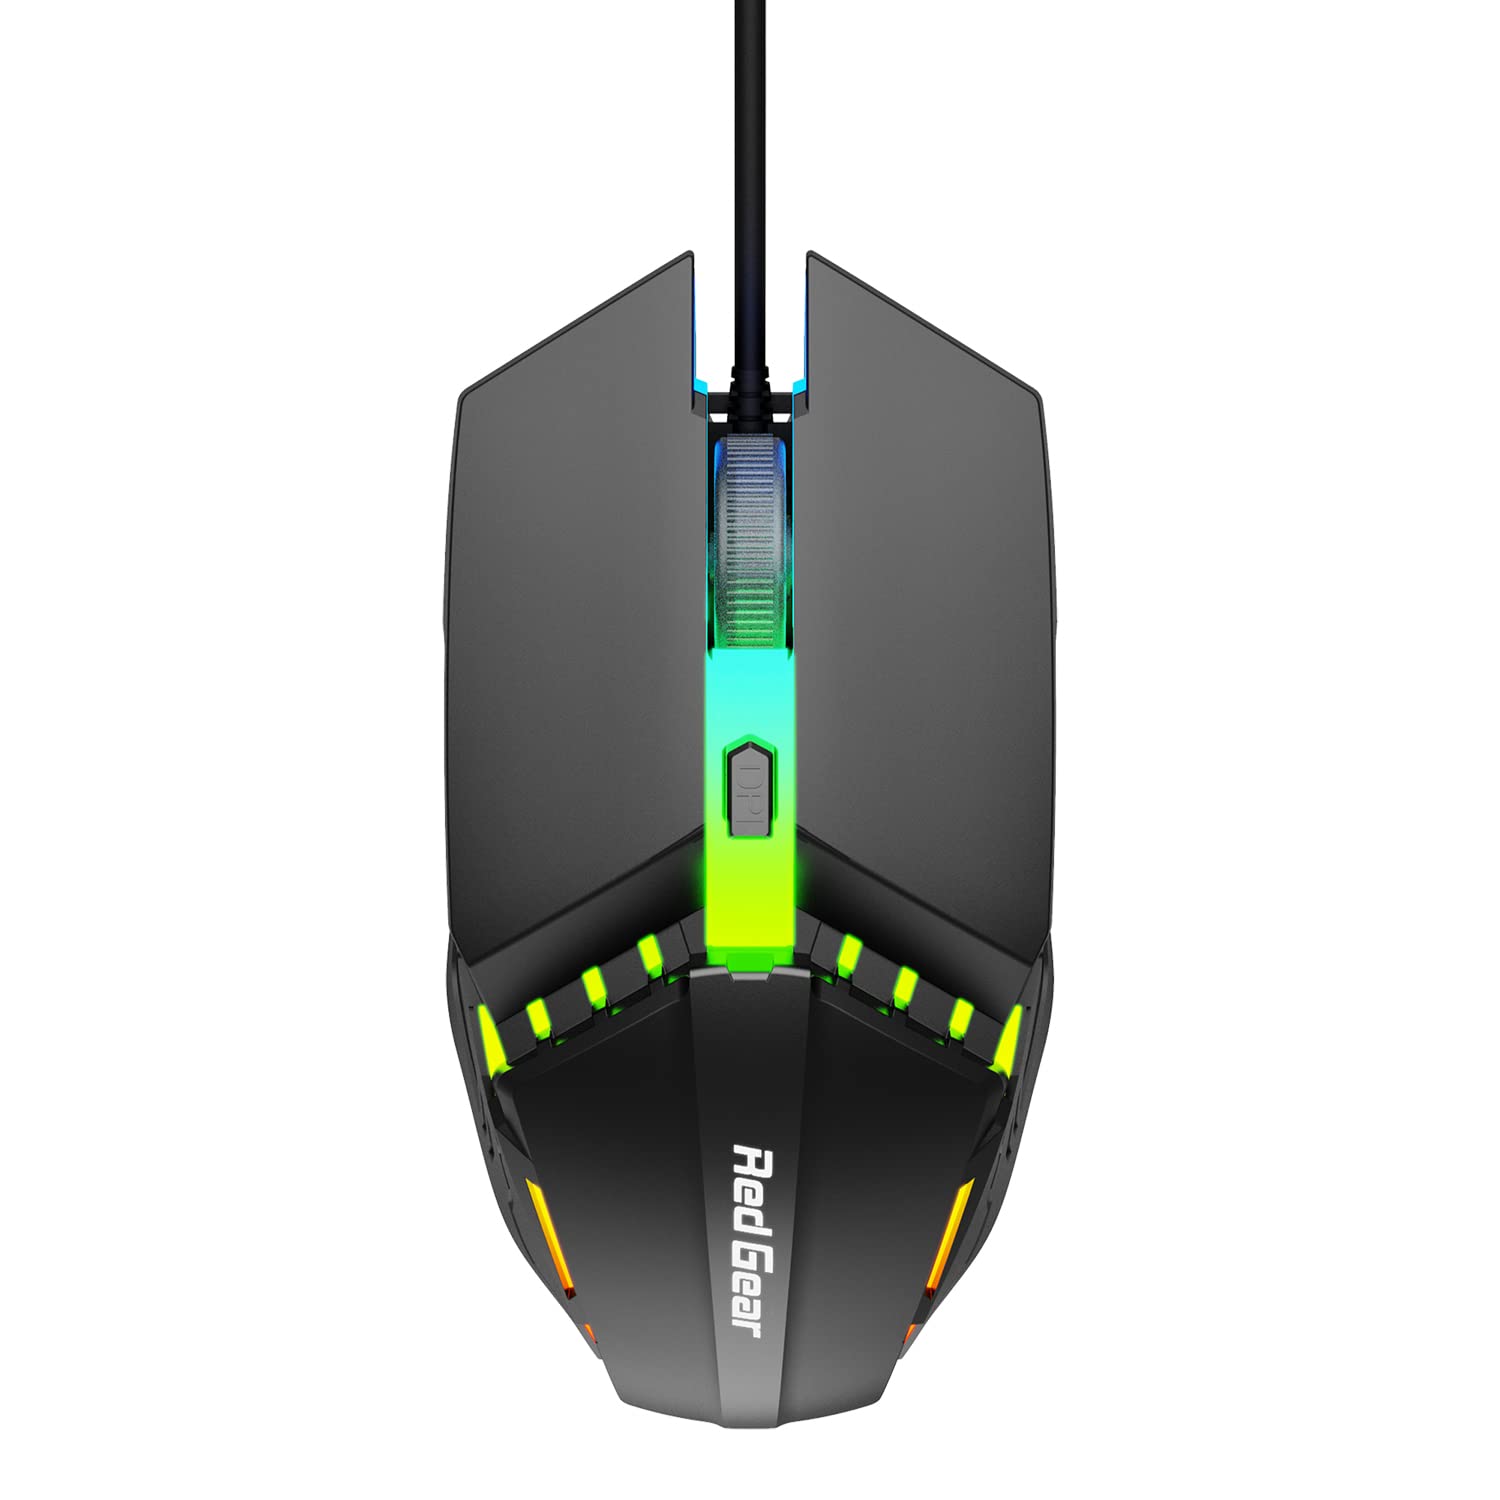 Redgear A-10 USB Wired Gaming Mouse with LED, Upto 2400 DPI